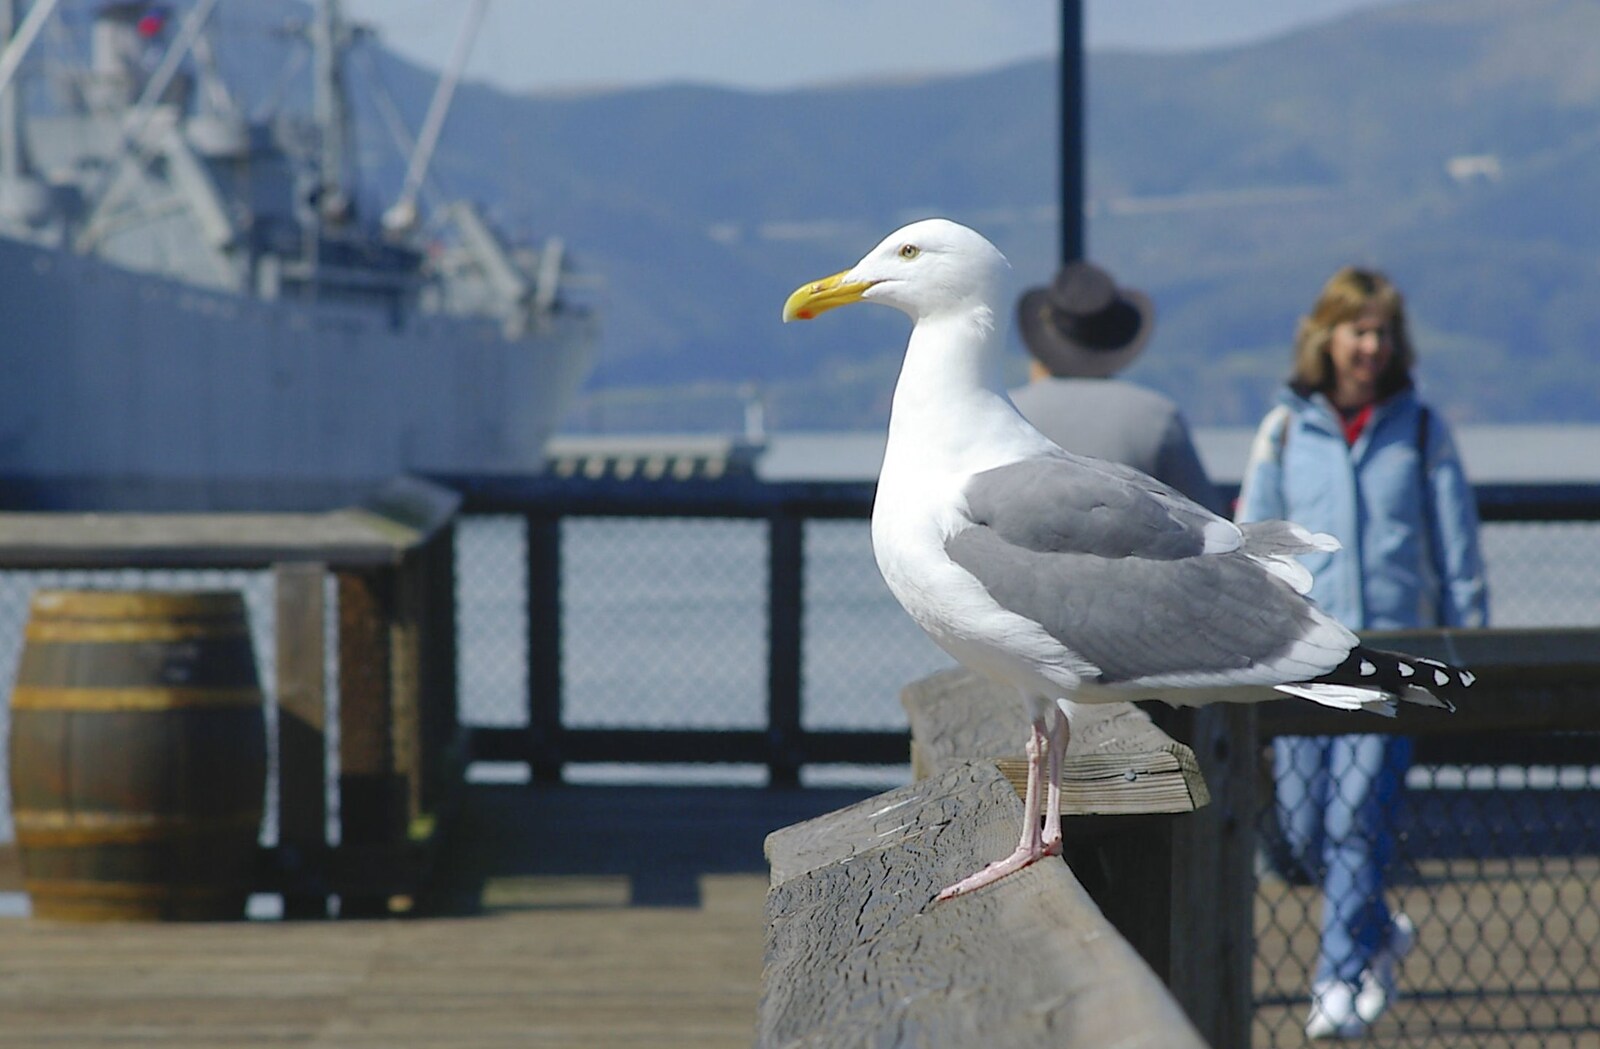 Another seagull from Chinatown, Telegraph Hill and Fisherman's Wharf, San Francisco, California, US - 11th March 2006